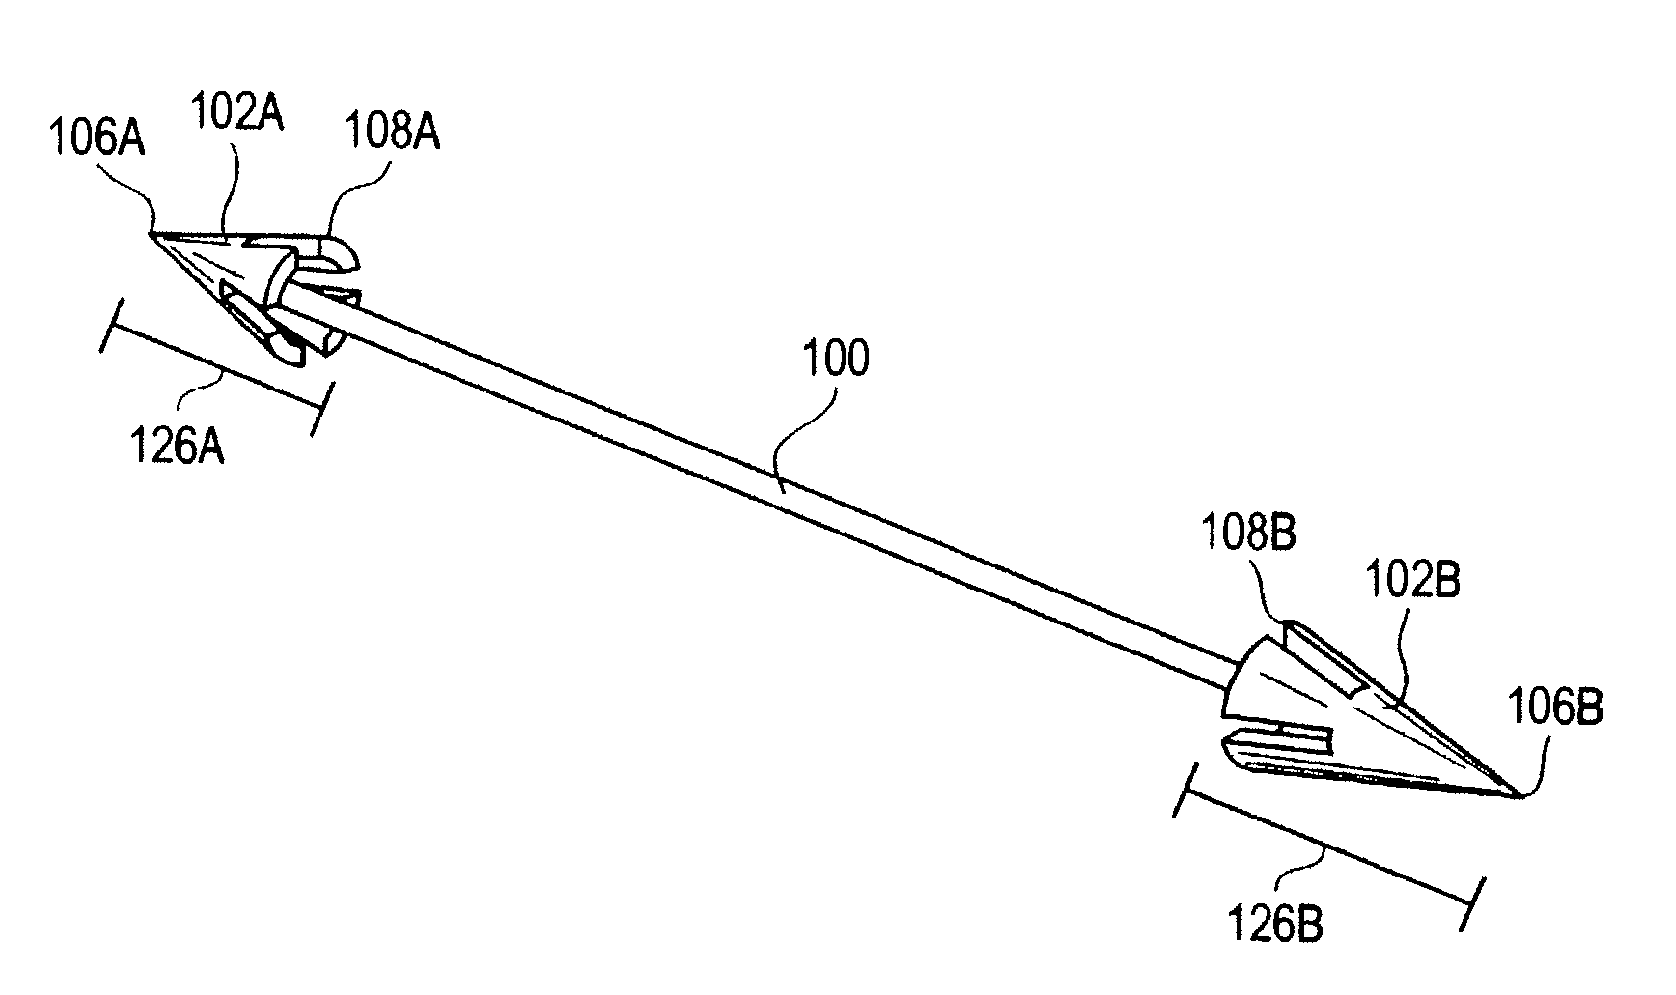 Apparatuses and methods for heart valve repair